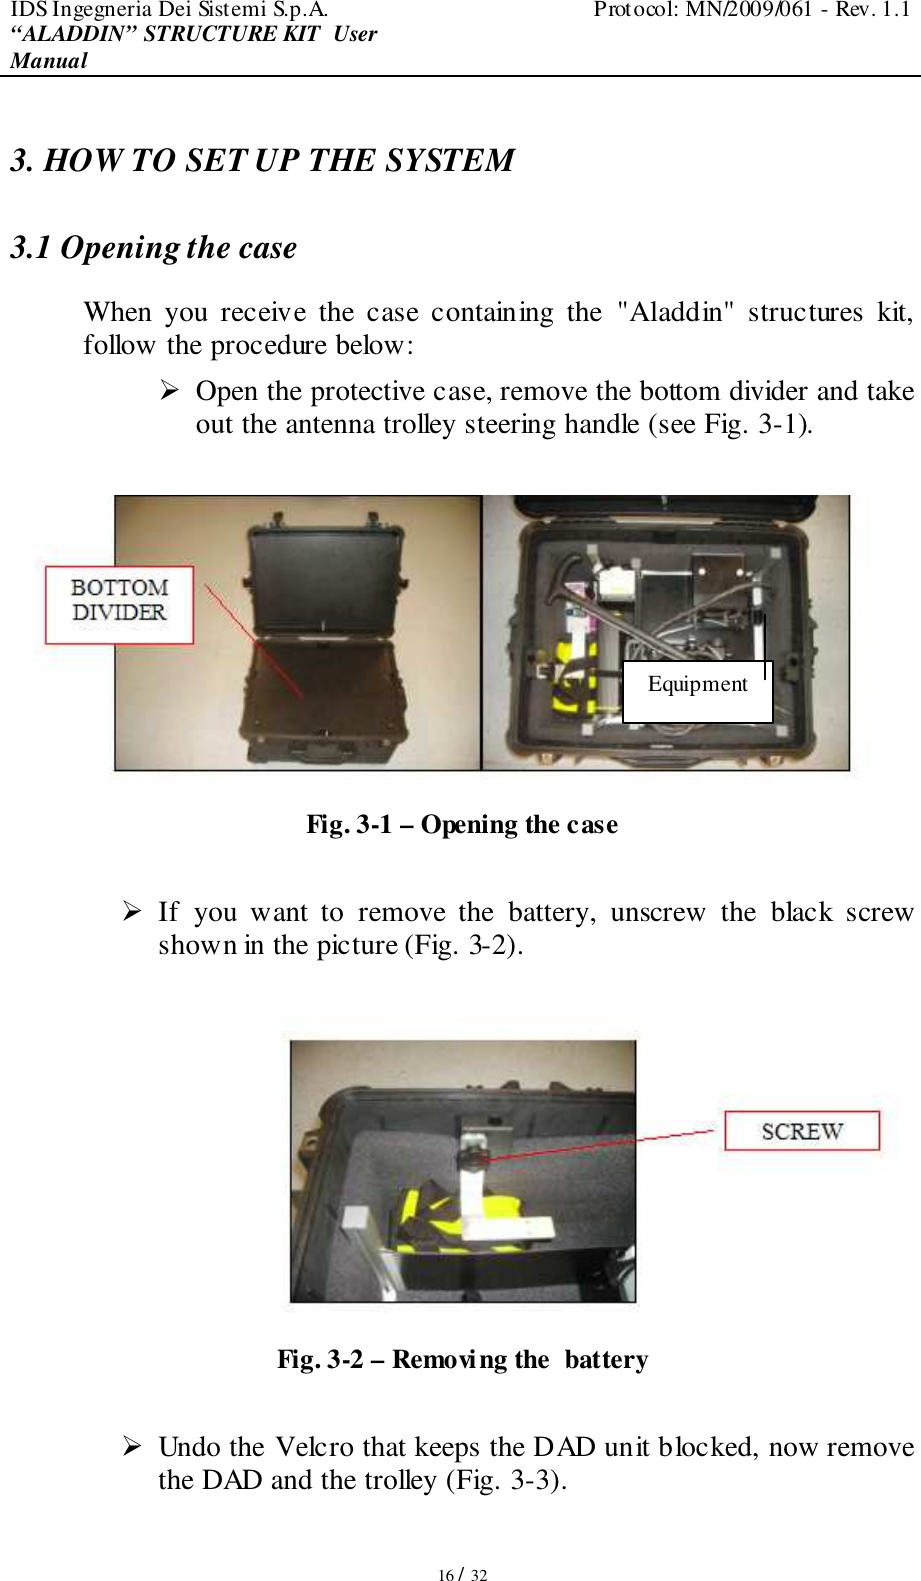 IDS Ingegneria Dei Sistemi S.p.A.  Protocol: MN/2009/061 - Rev. 1.1 “ALADDIN” STRUCTURE KIT  User Manual   16 / 32 3. HOW TO SET UP THE SYSTEM 3.1 Opening the case  When  you  receive  the  case  containing  the  &quot;Aladdin&quot;  structures  kit, follow the procedure below:   Open the protective case, remove the bottom divider and take out the antenna trolley steering handle (see Fig. 3-1).   Fig. 3-1 – Opening the case   If  you  want  to  remove  the  battery,  unscrew  the  black  screw shown in the picture (Fig. 3-2).   Fig. 3-2 – Removing the  battery   Undo the Velcro that keeps the DAD unit blocked, now remove the DAD and the trolley (Fig. 3-3).   Equipment 